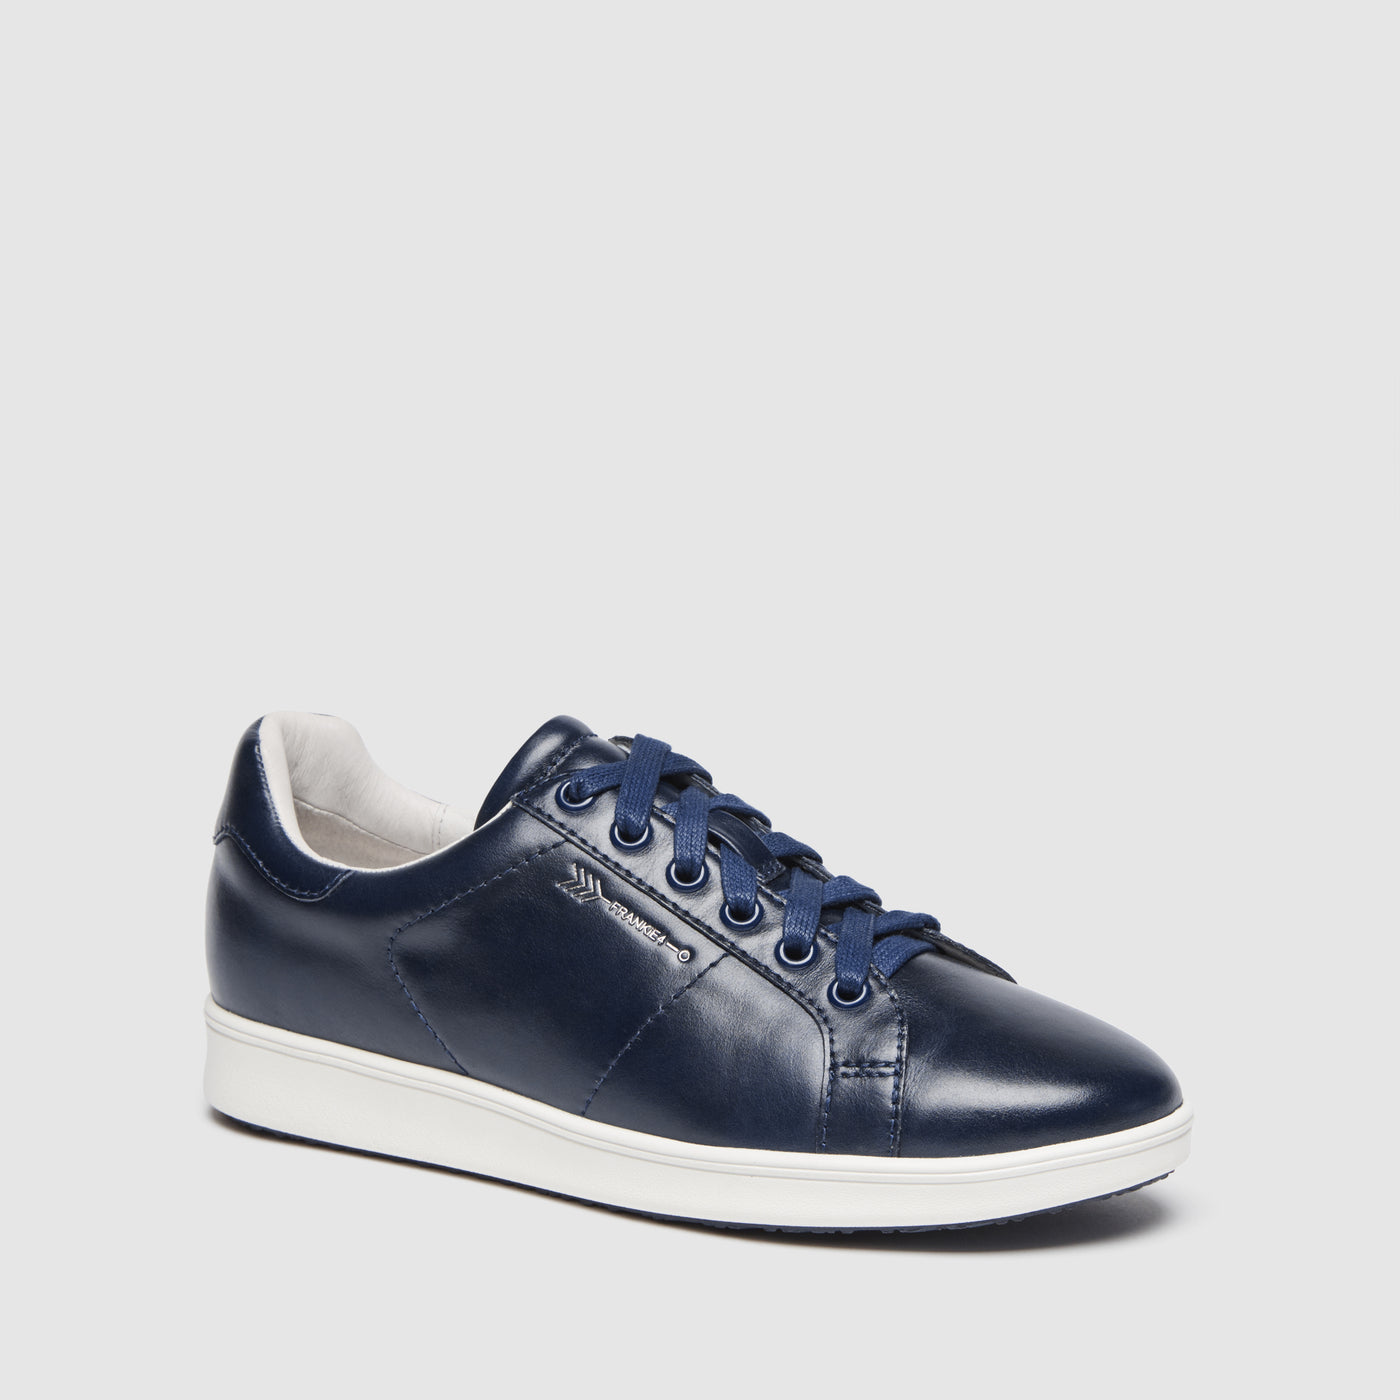 Navy Sneaker white sole - Contrasting Lace 